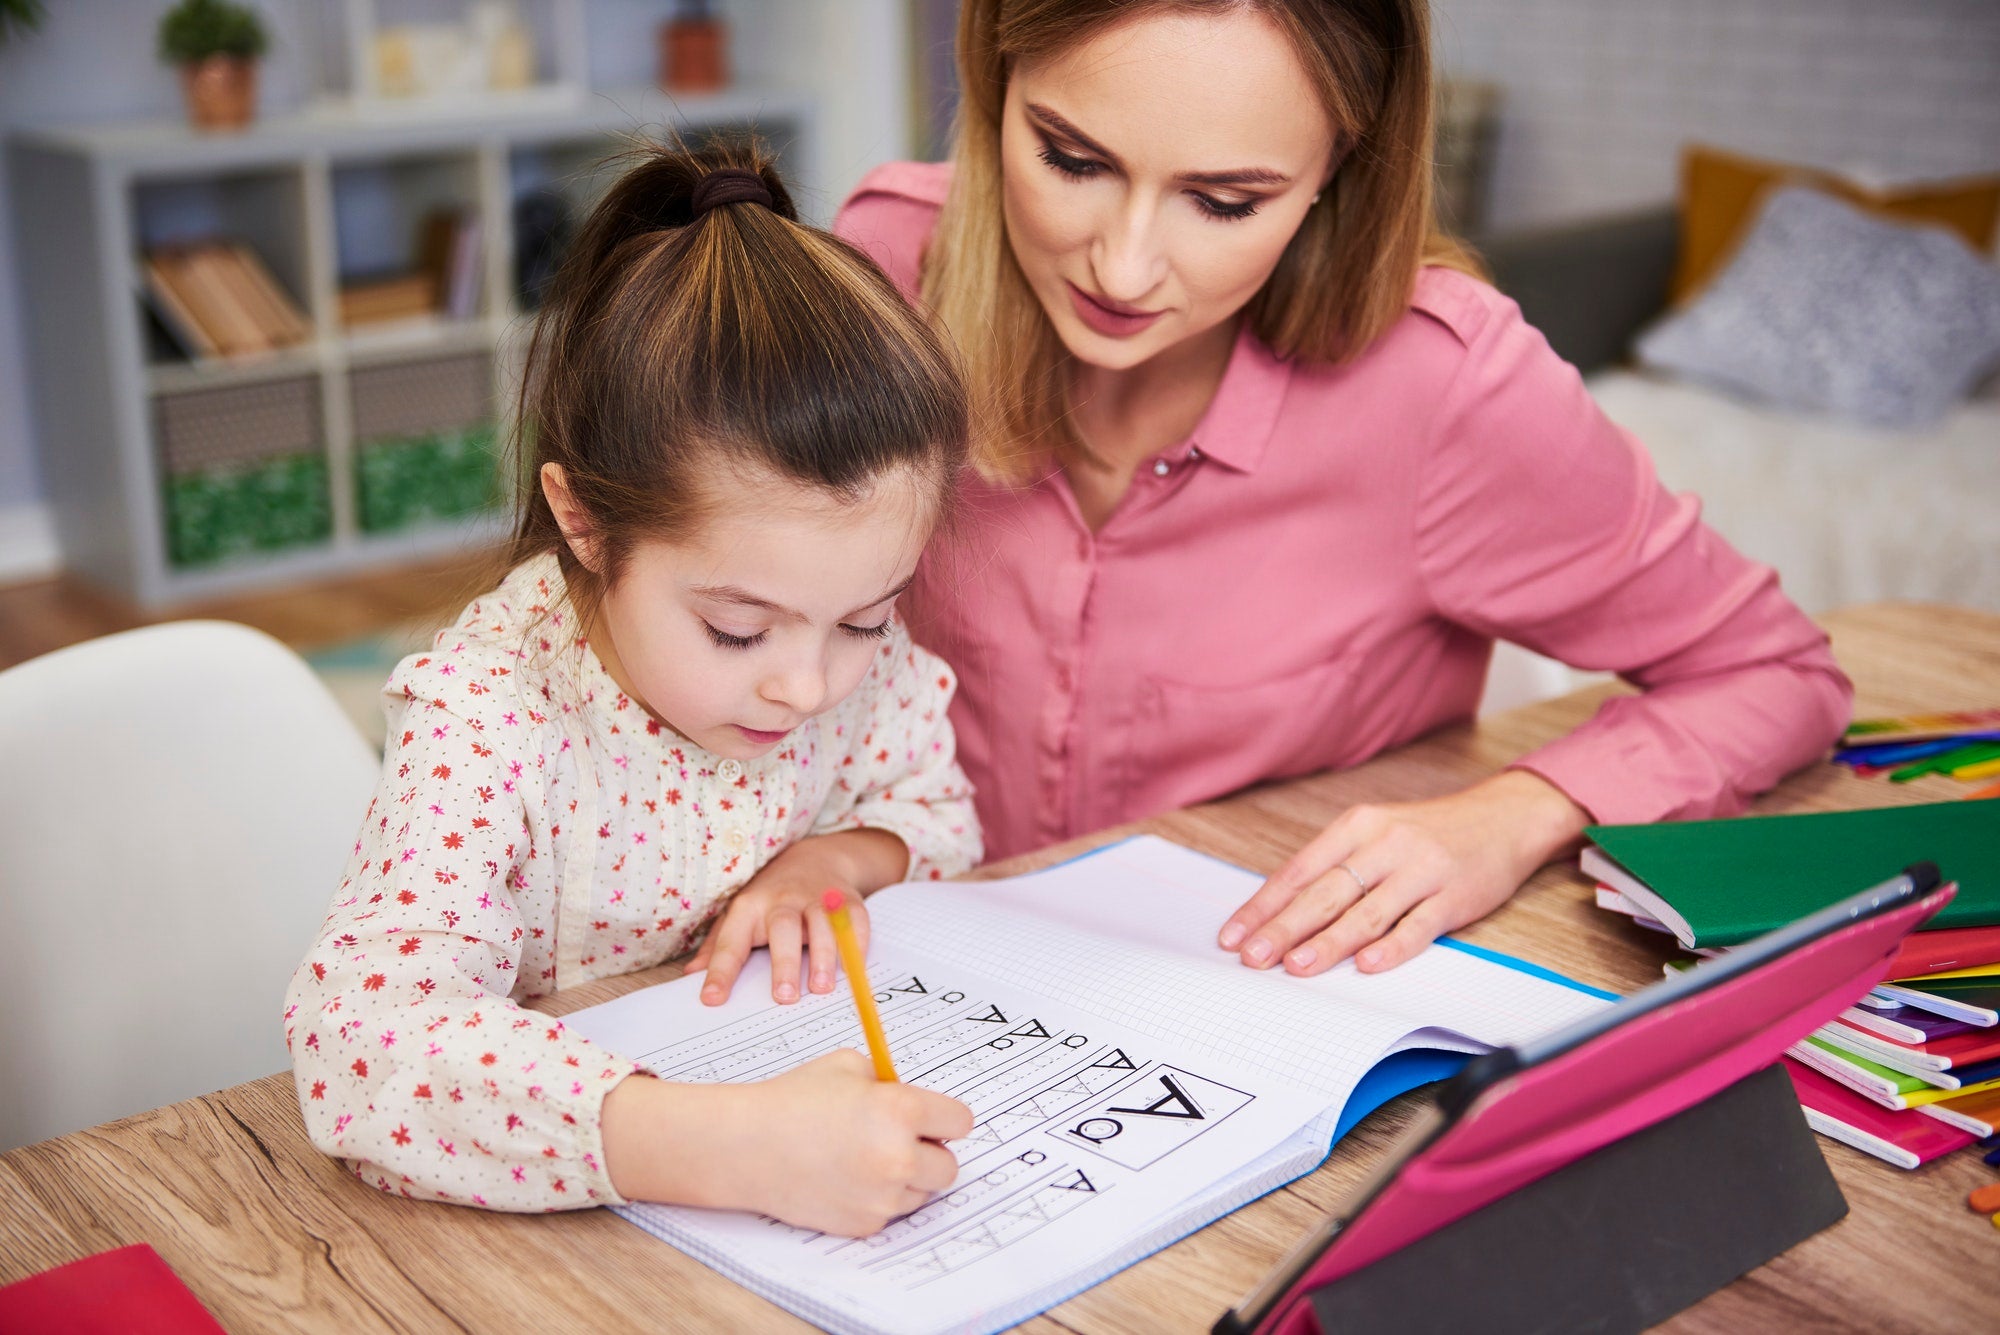 Homeschooling 101: What It Is and the Pros & Cons